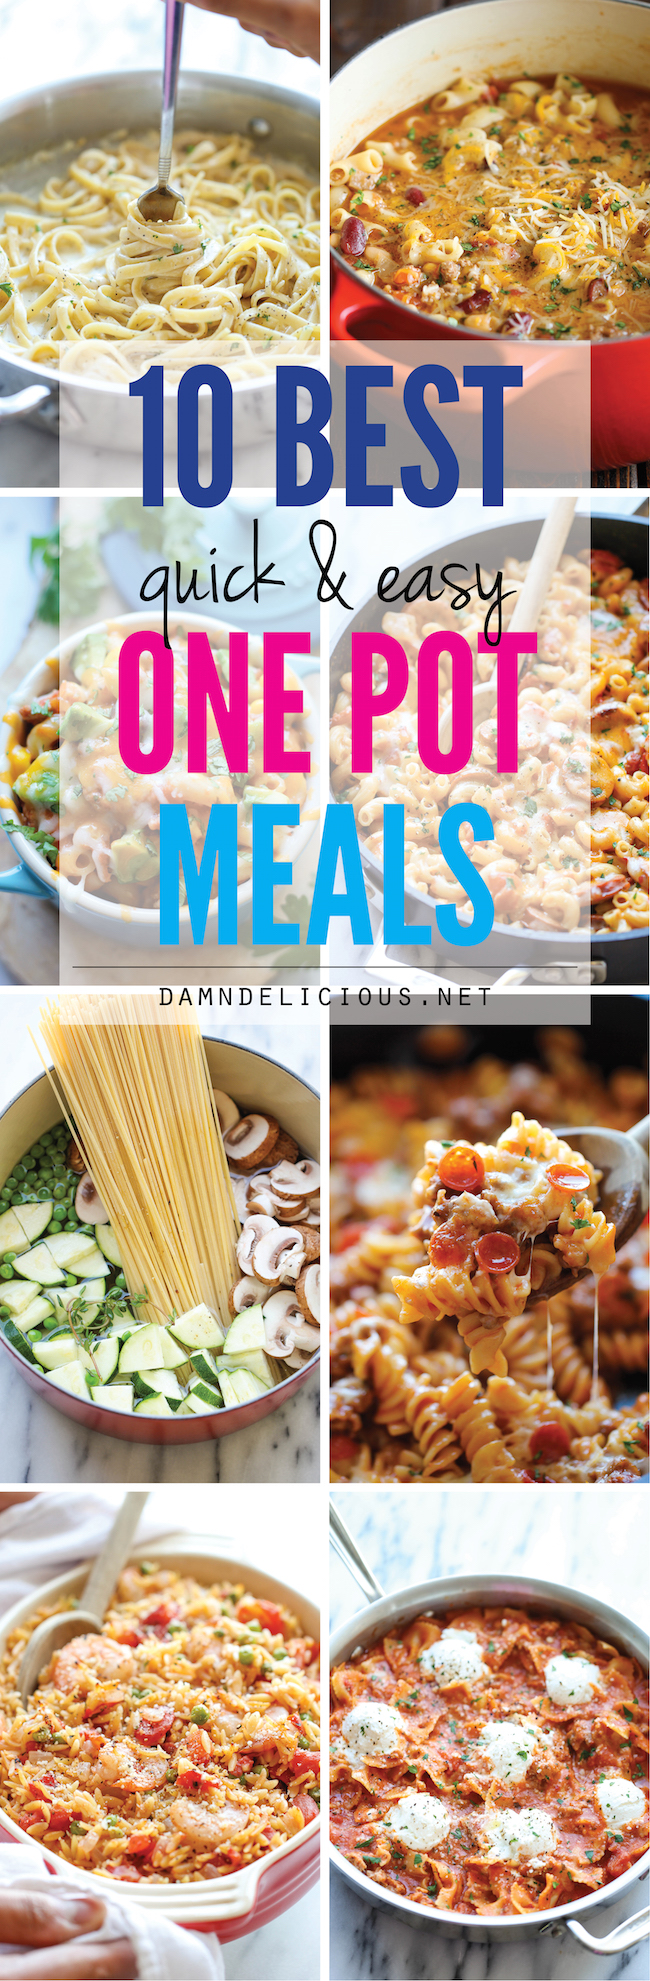 10 Quick and Easy One Pot Meals - No-fuss one pot meals for those busy nights when you just don't have the time. Easy peasy with only one pan to clean up!